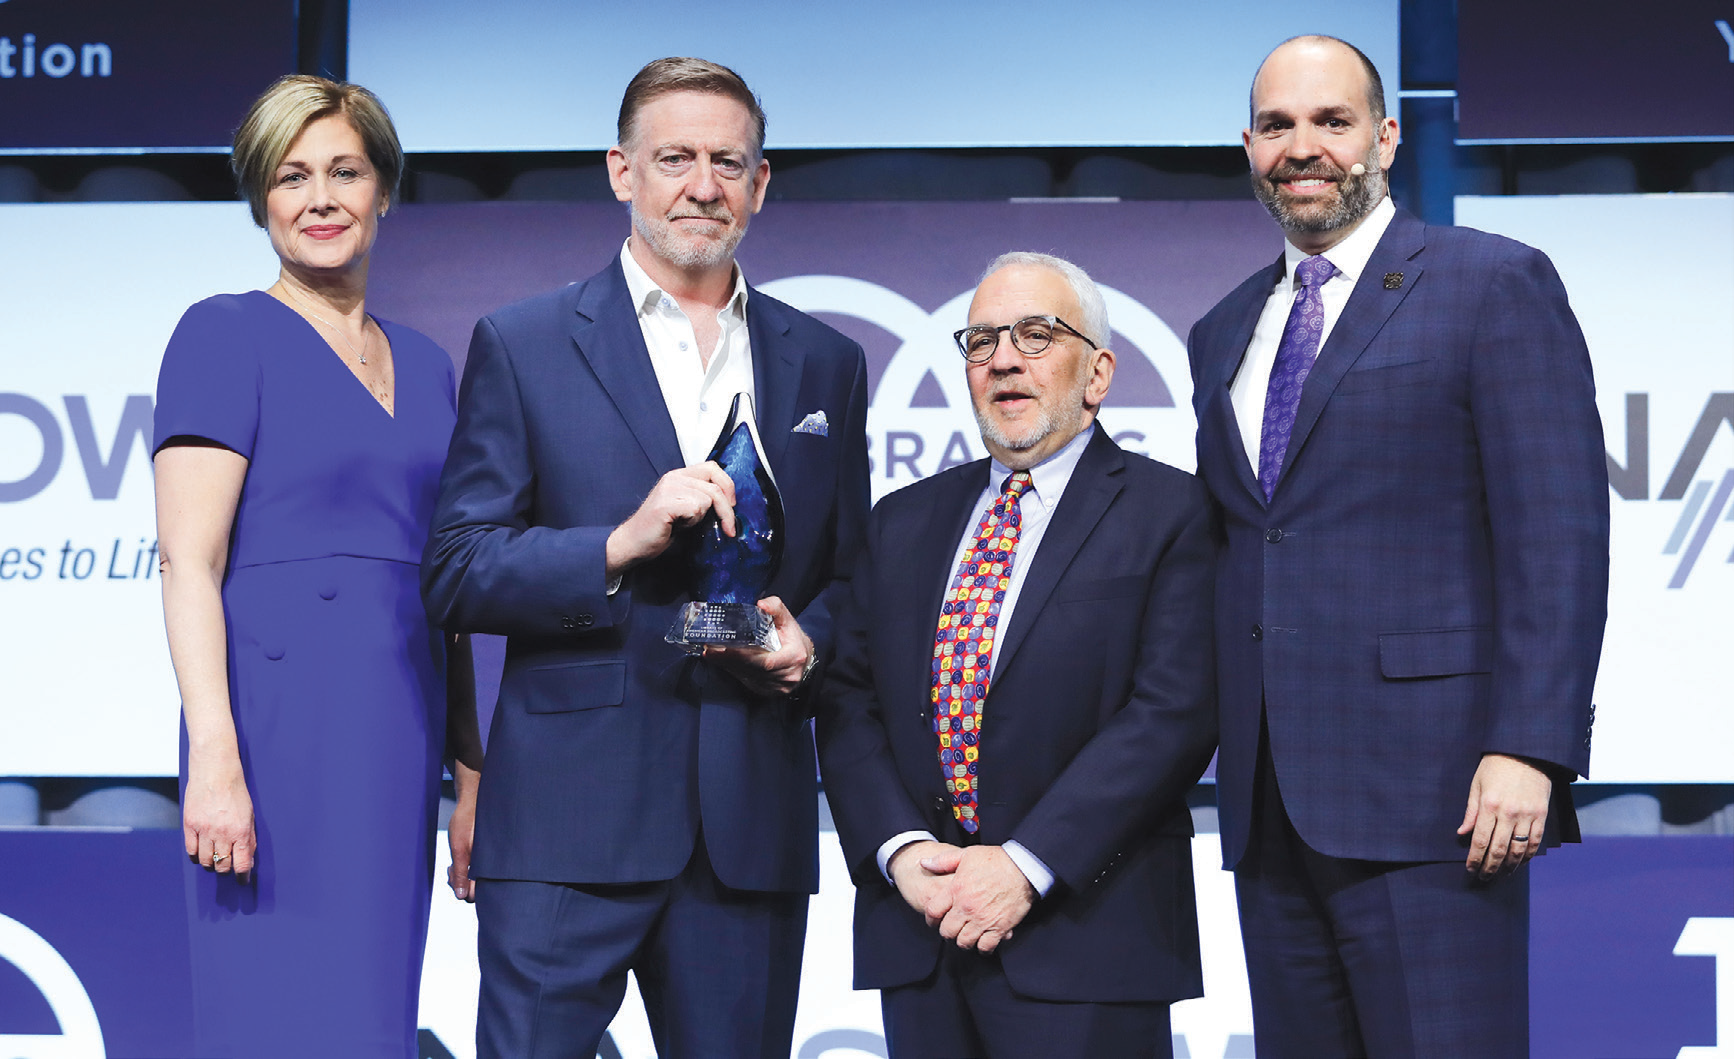 The Library of American Broadcasting Foundation’s second annual Insight Award to CBS newsmagazine “60 Minutes” during
Monday’s welcome session (from left): Session co-chair Heidi Raphael of the LABF; “60 Minutes” Executive Producer Bill Owens;
session co-chair Jack N. Goodman and NAB President and CEO Curtis LeGeyt.